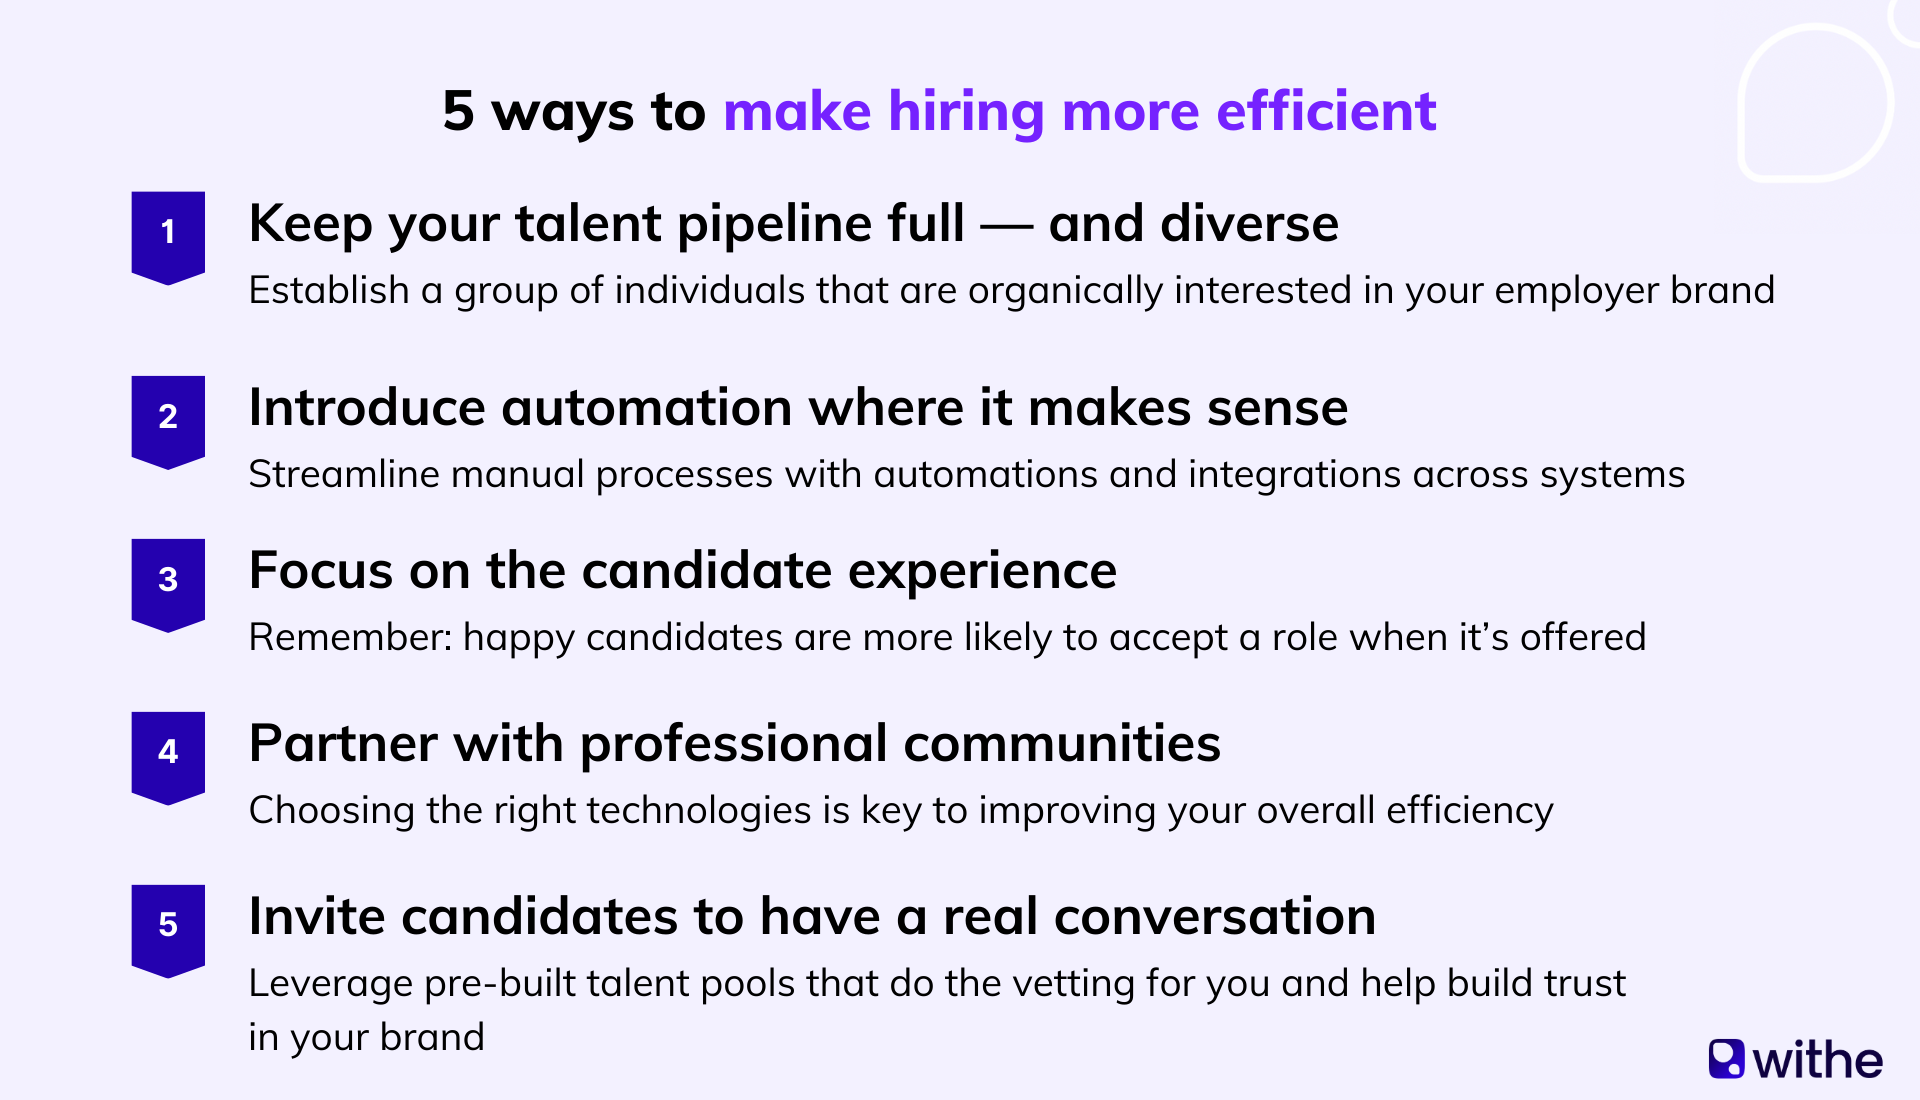 5 ways to make your hiring process more efficient